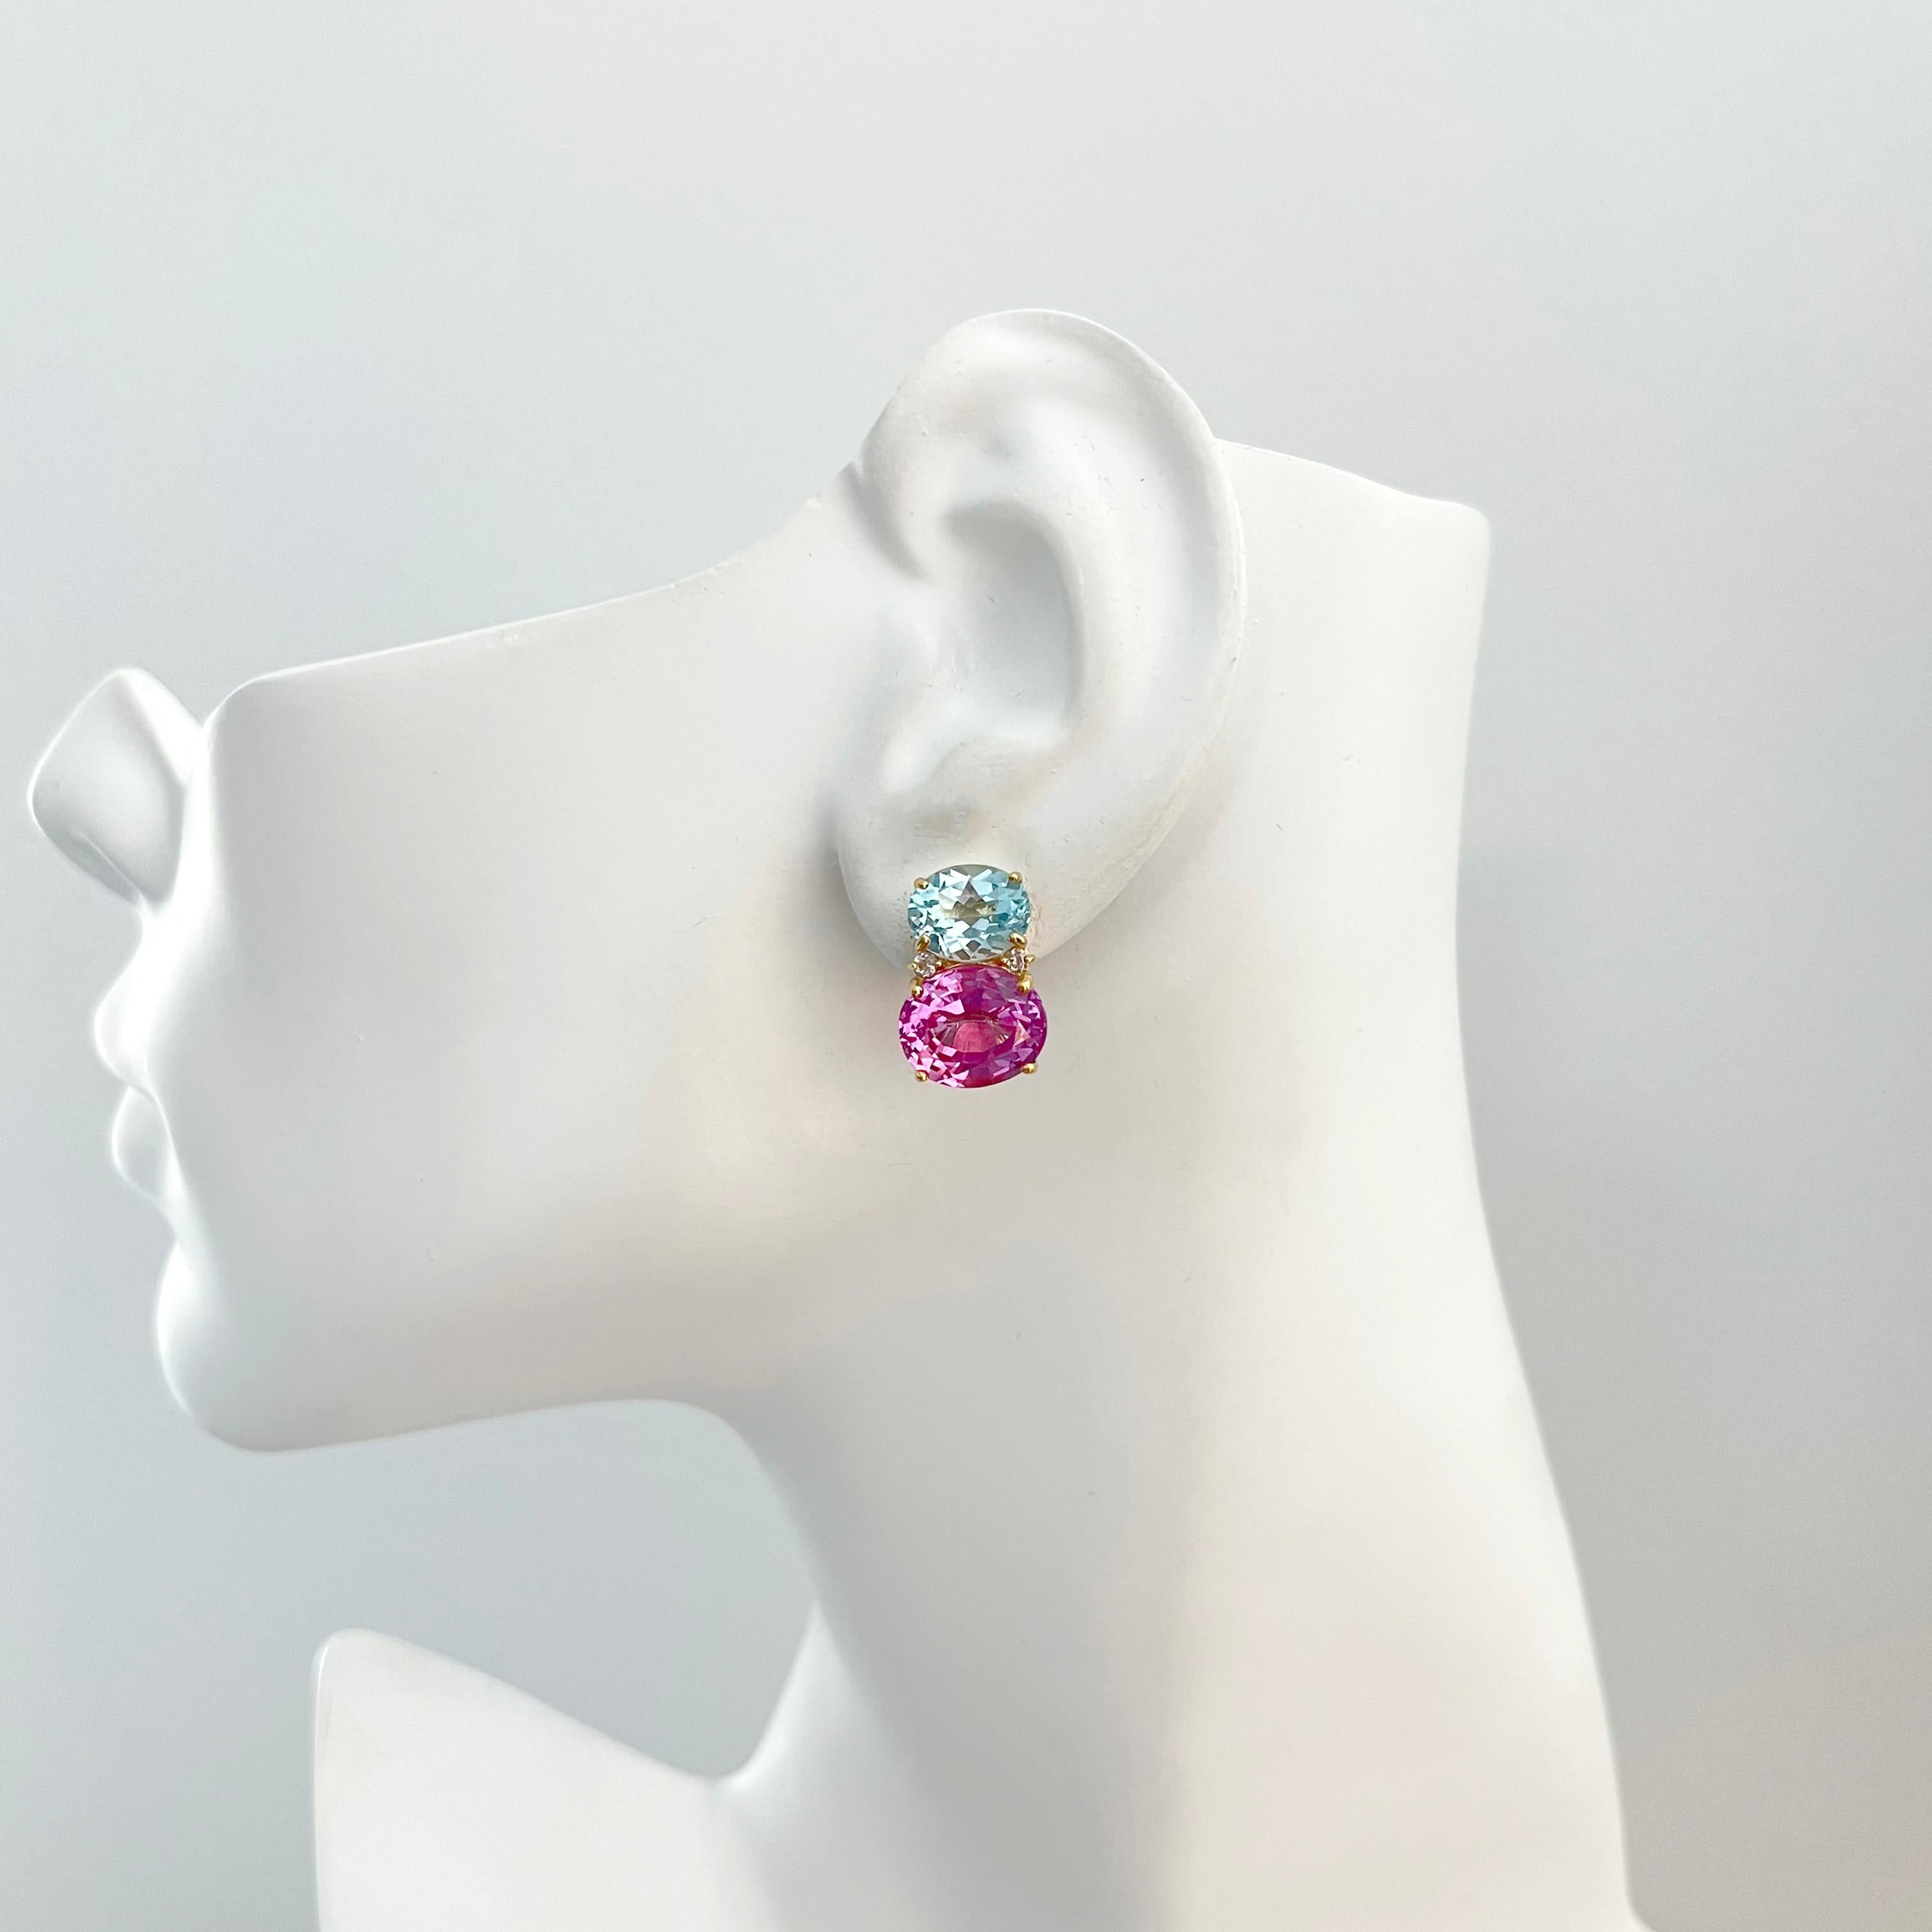 Stunning Double Oval Blue Topaz & Pink Sapphire Earrings For Sale 1